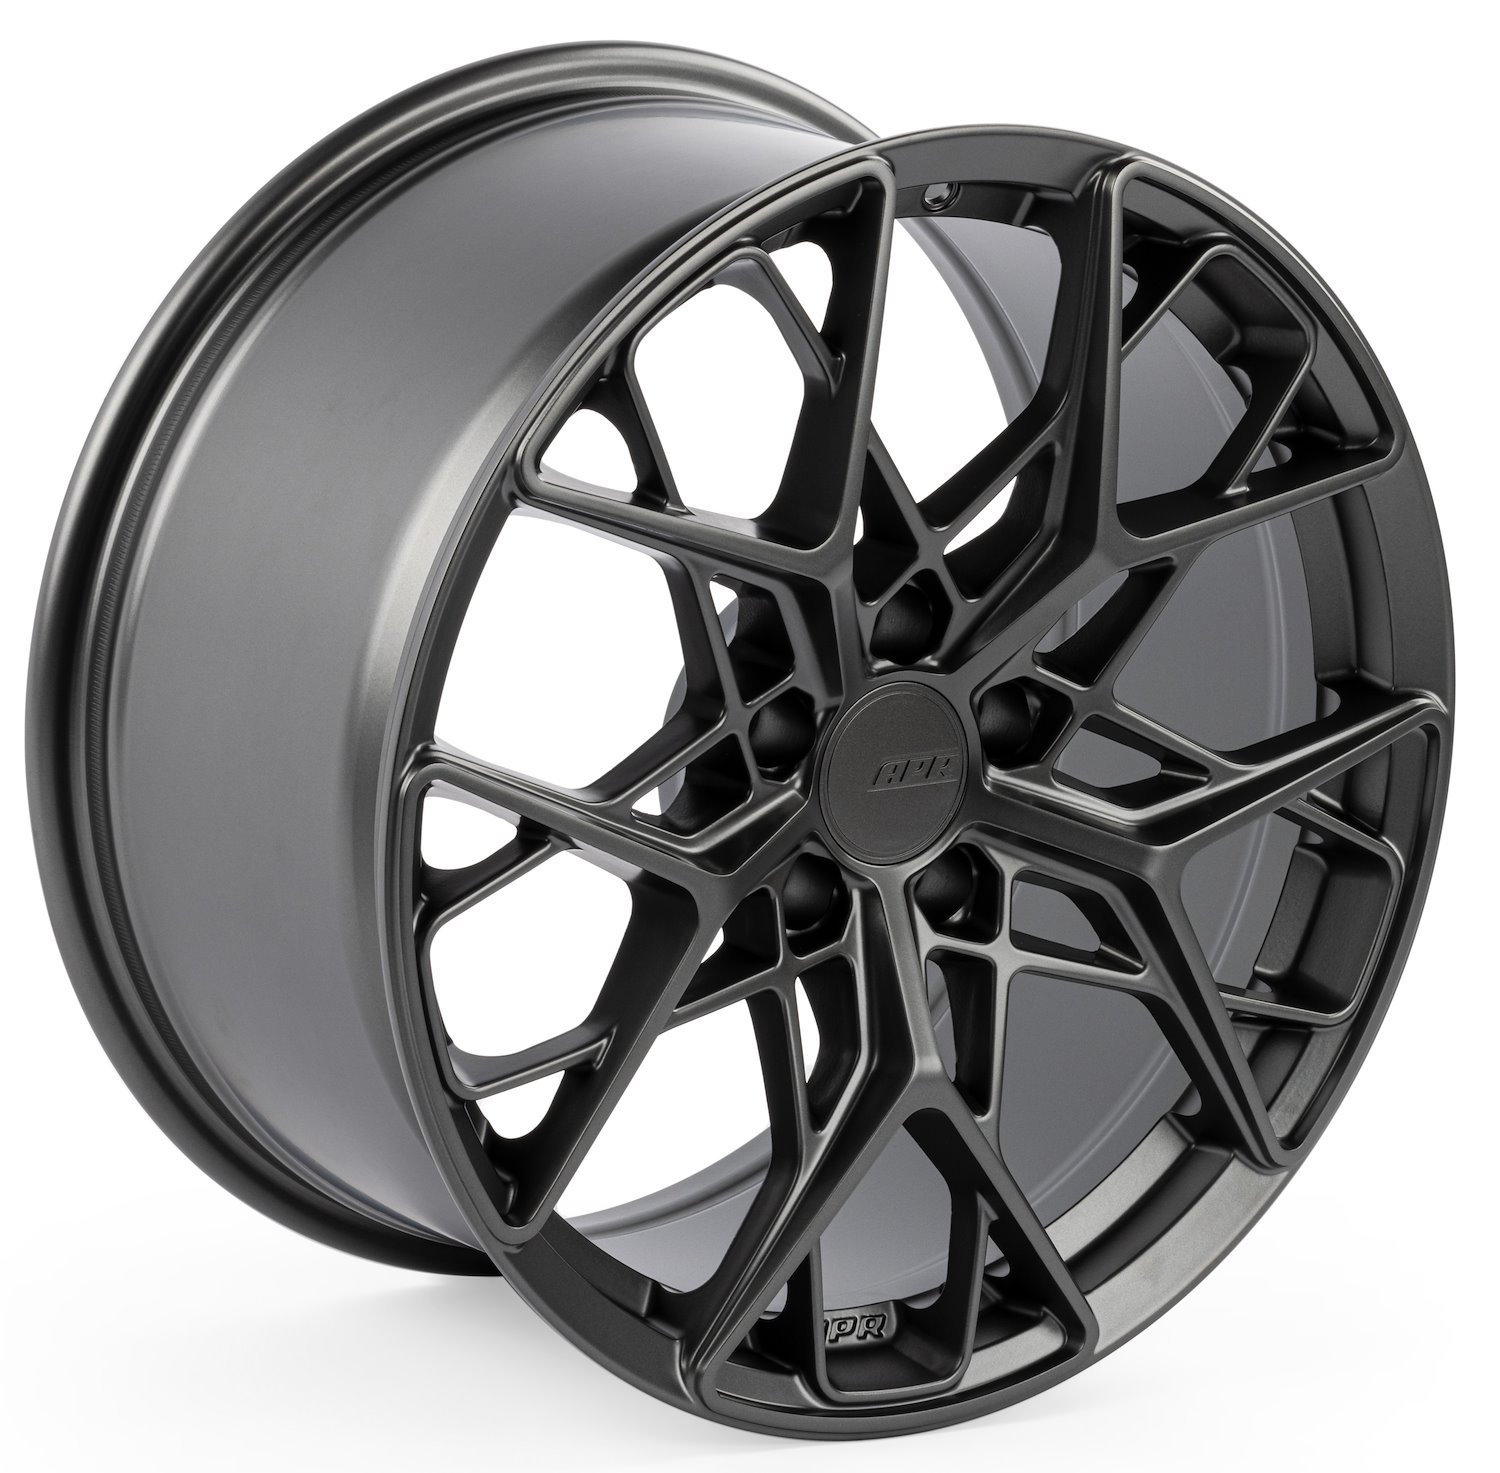 A02 Flow-Formed Wheel, Size: 18 x 9" [Anthracite]